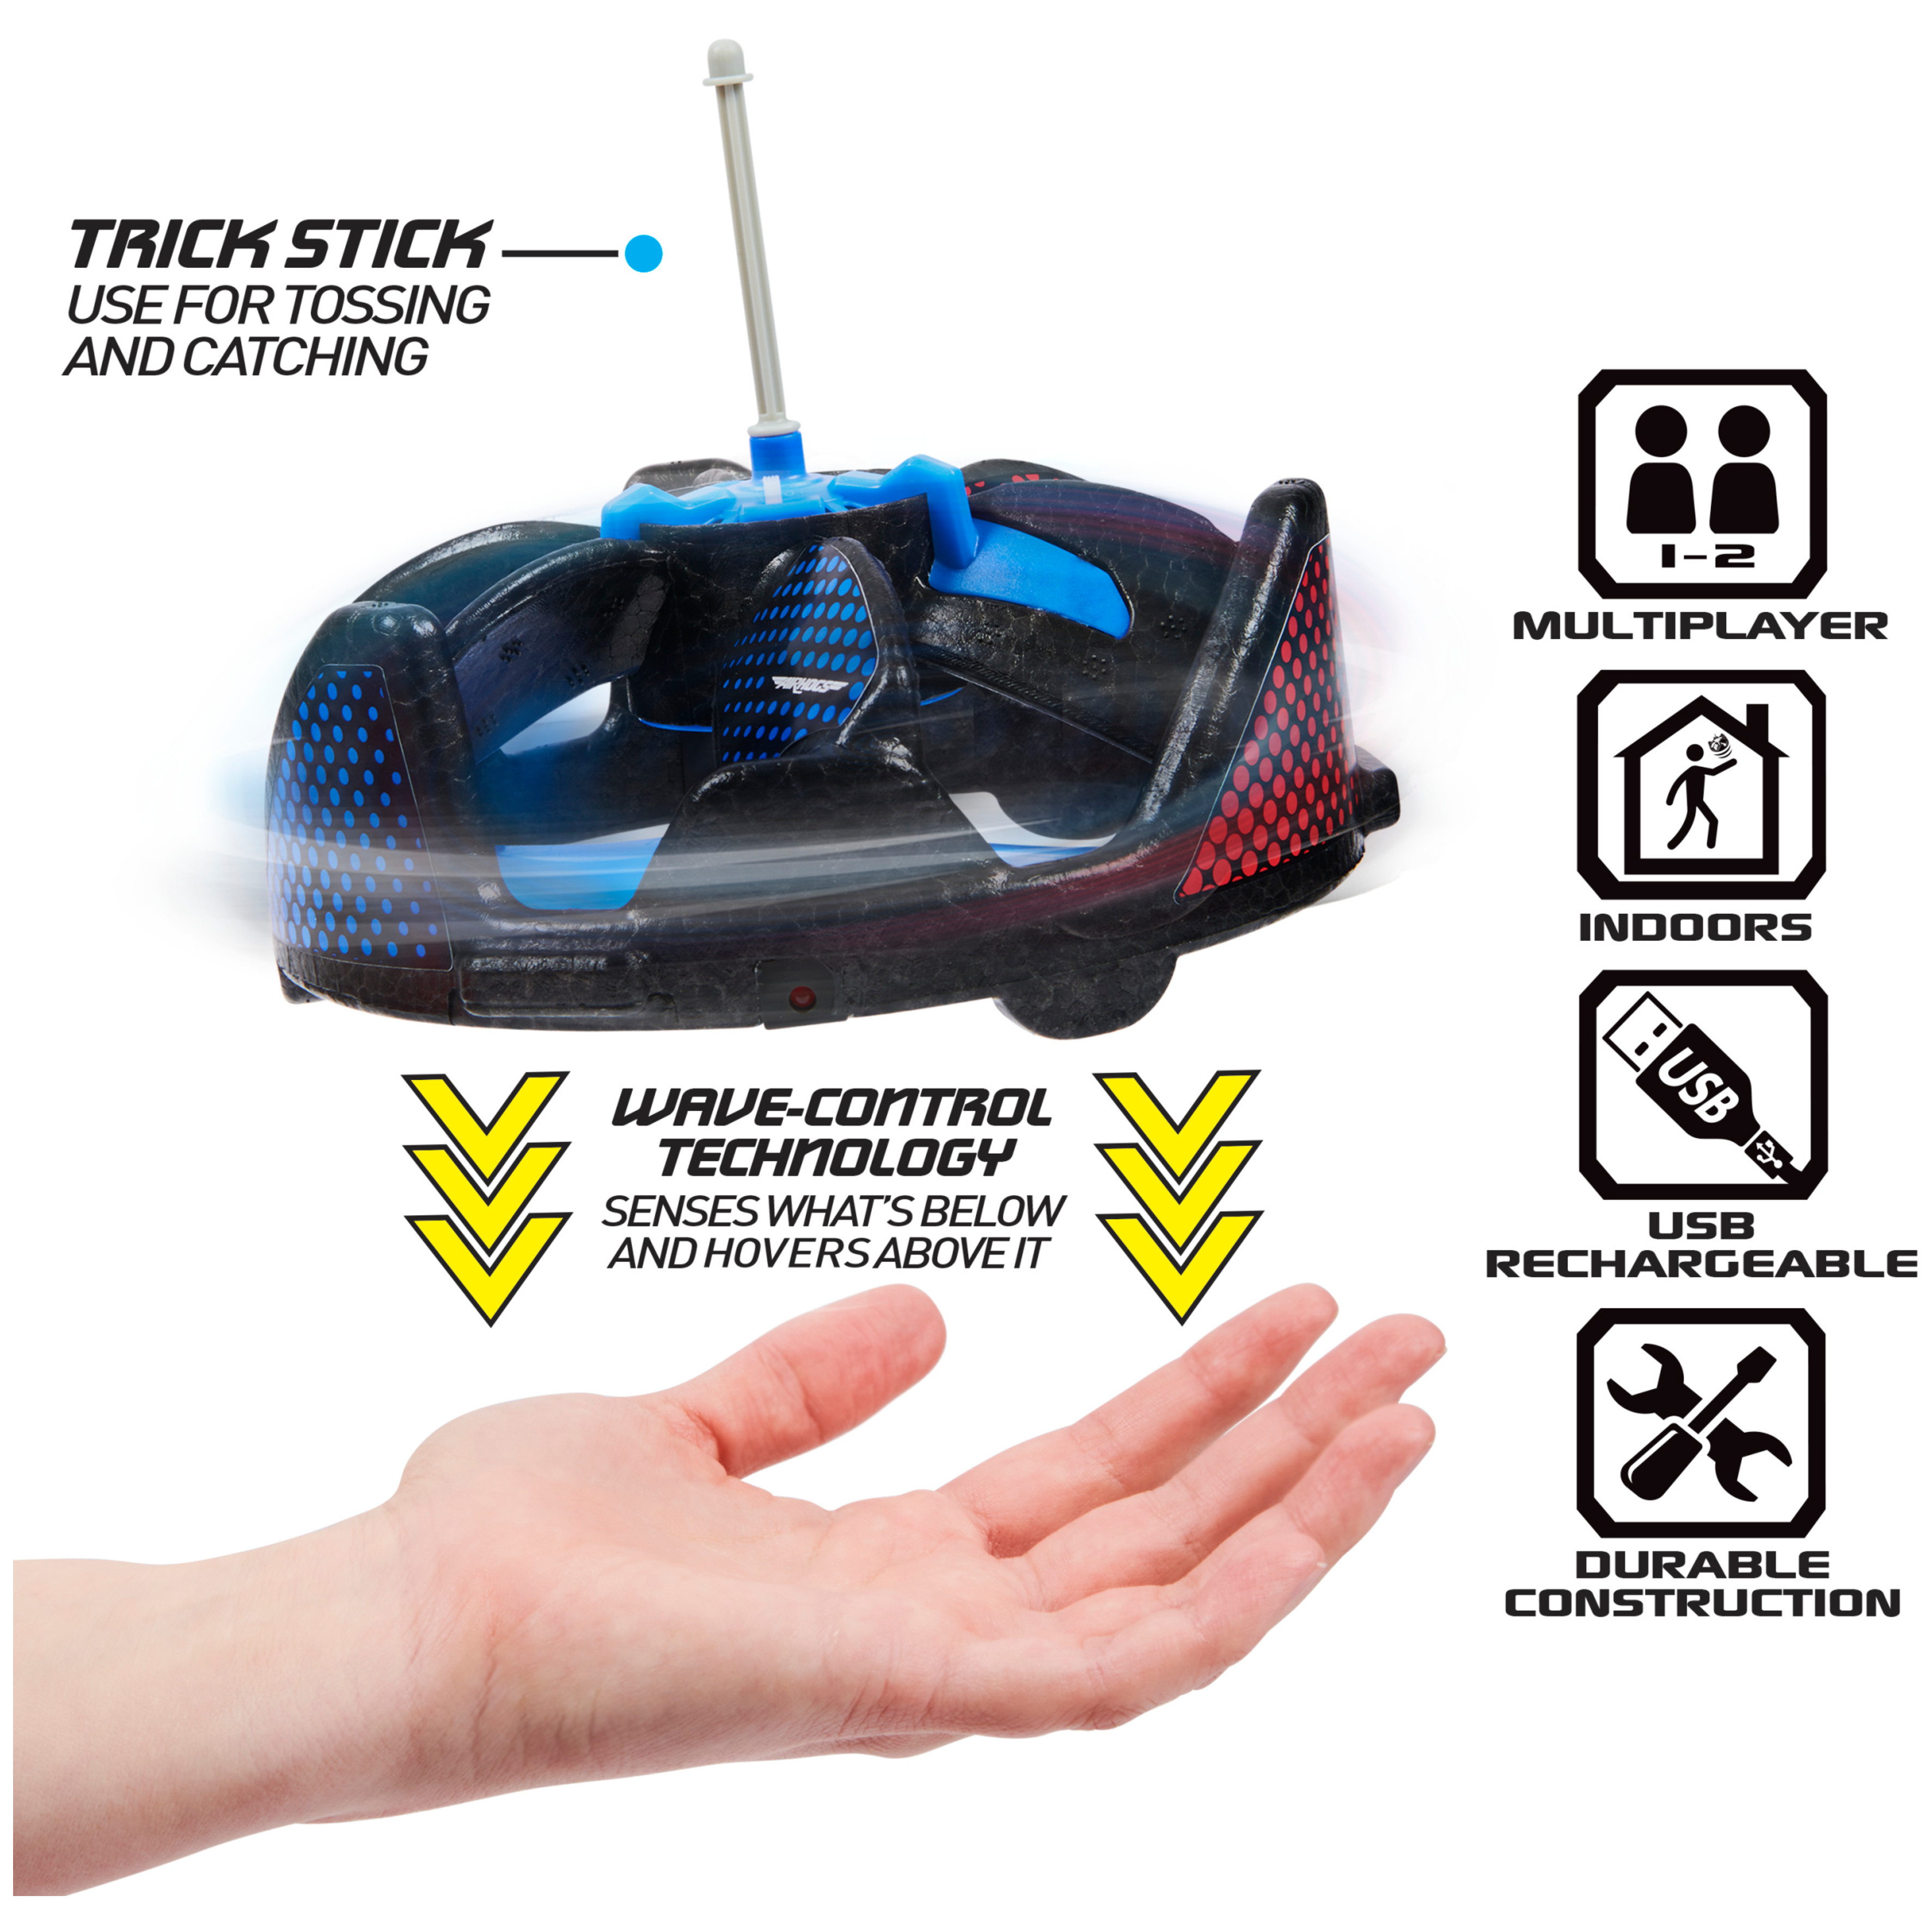 Air Hogs Gravitor with Trick Stick, USB Rechargeable Flying Toy - image 5 of 10